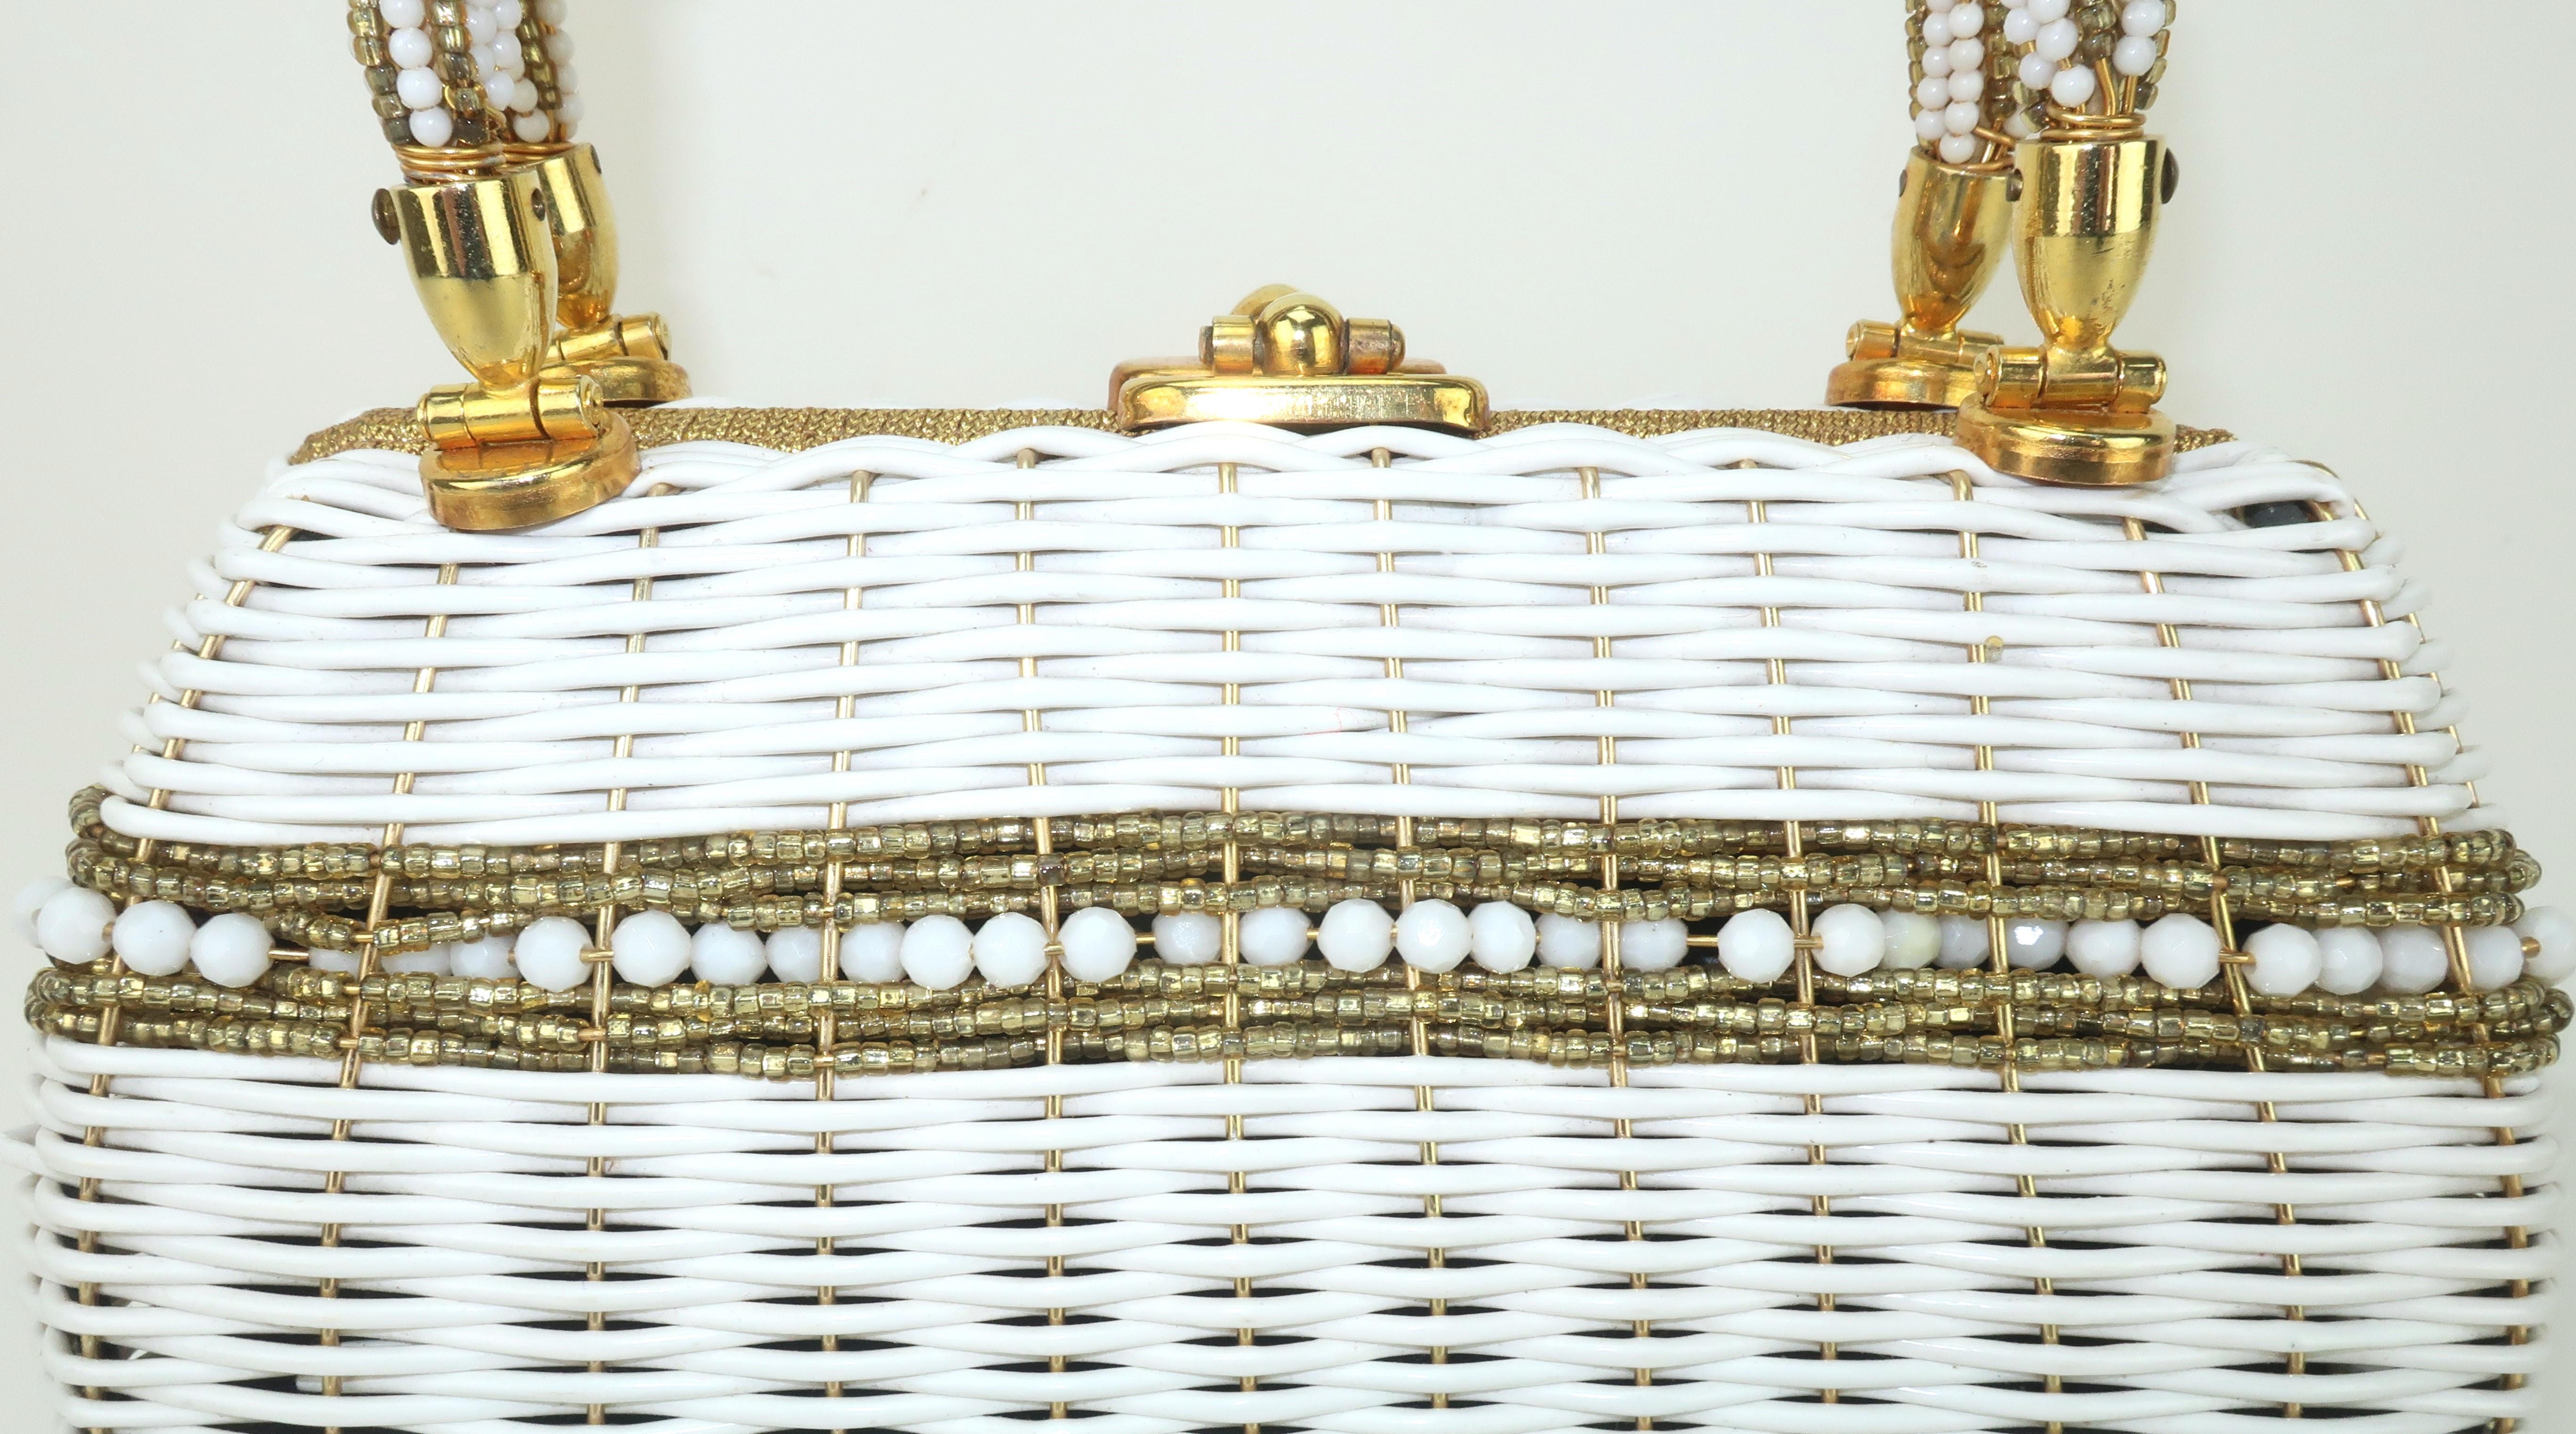 Marcus Brothers Beaded White & Gold Straw Handbag, 1950's For Sale 3